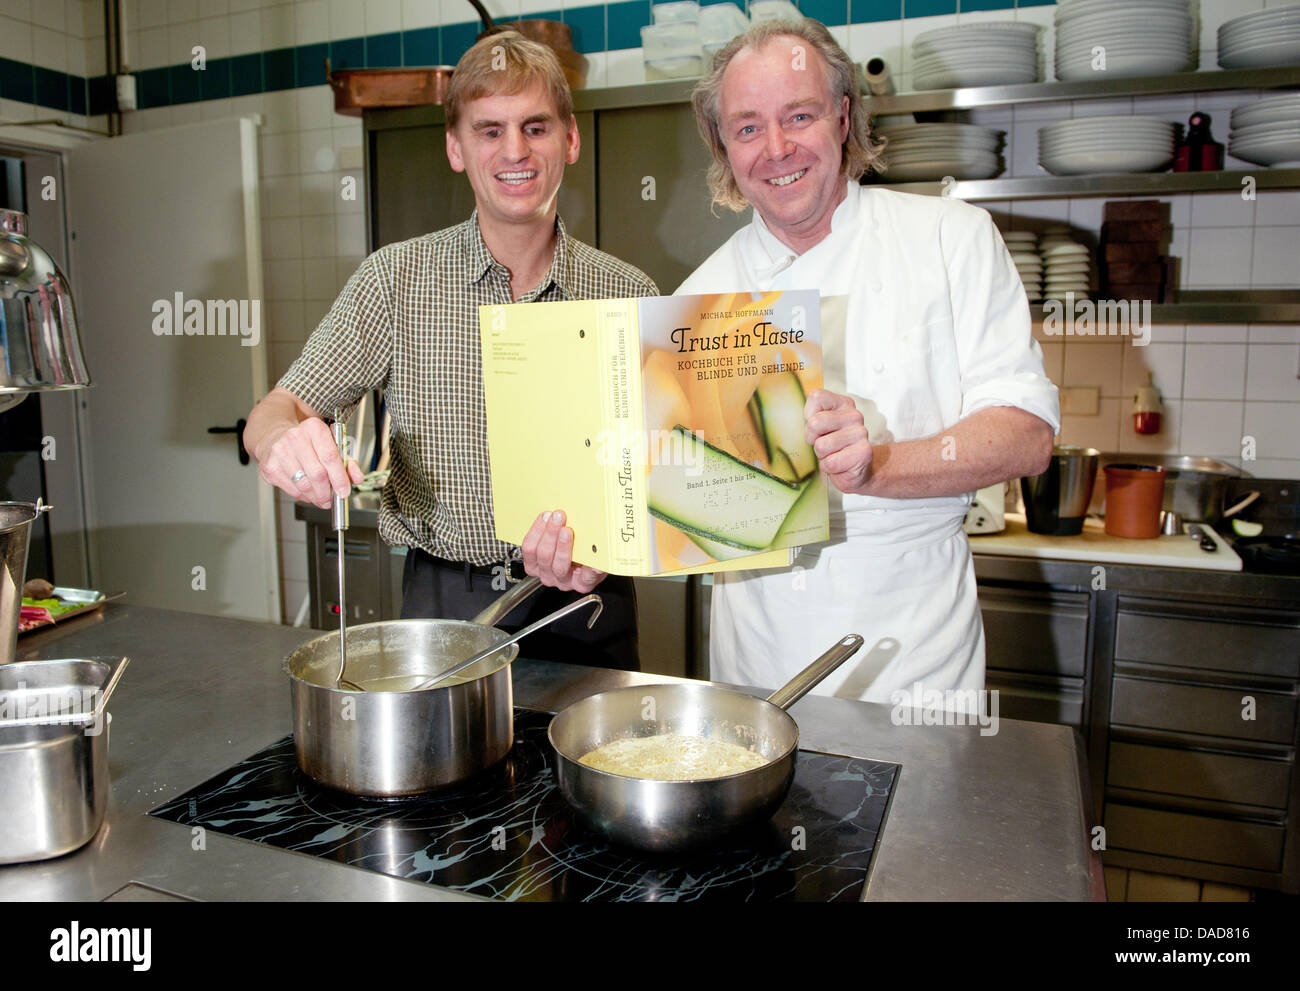 The blind hobby chef Hans Maier (L) and the Michelin-starred chef Michael Hoffmann pose during the presentation of the cookbook  'Trust in Taste - Kochbuch fuer Blinde und Sehende' ('Cookbook for blind and sighted persons') inside the kitchen of the restaurant Margaux in Berlin, Germany, 11 October 2011. The recipes are printed in black letters for sighted readers as well as in con Stock Photo